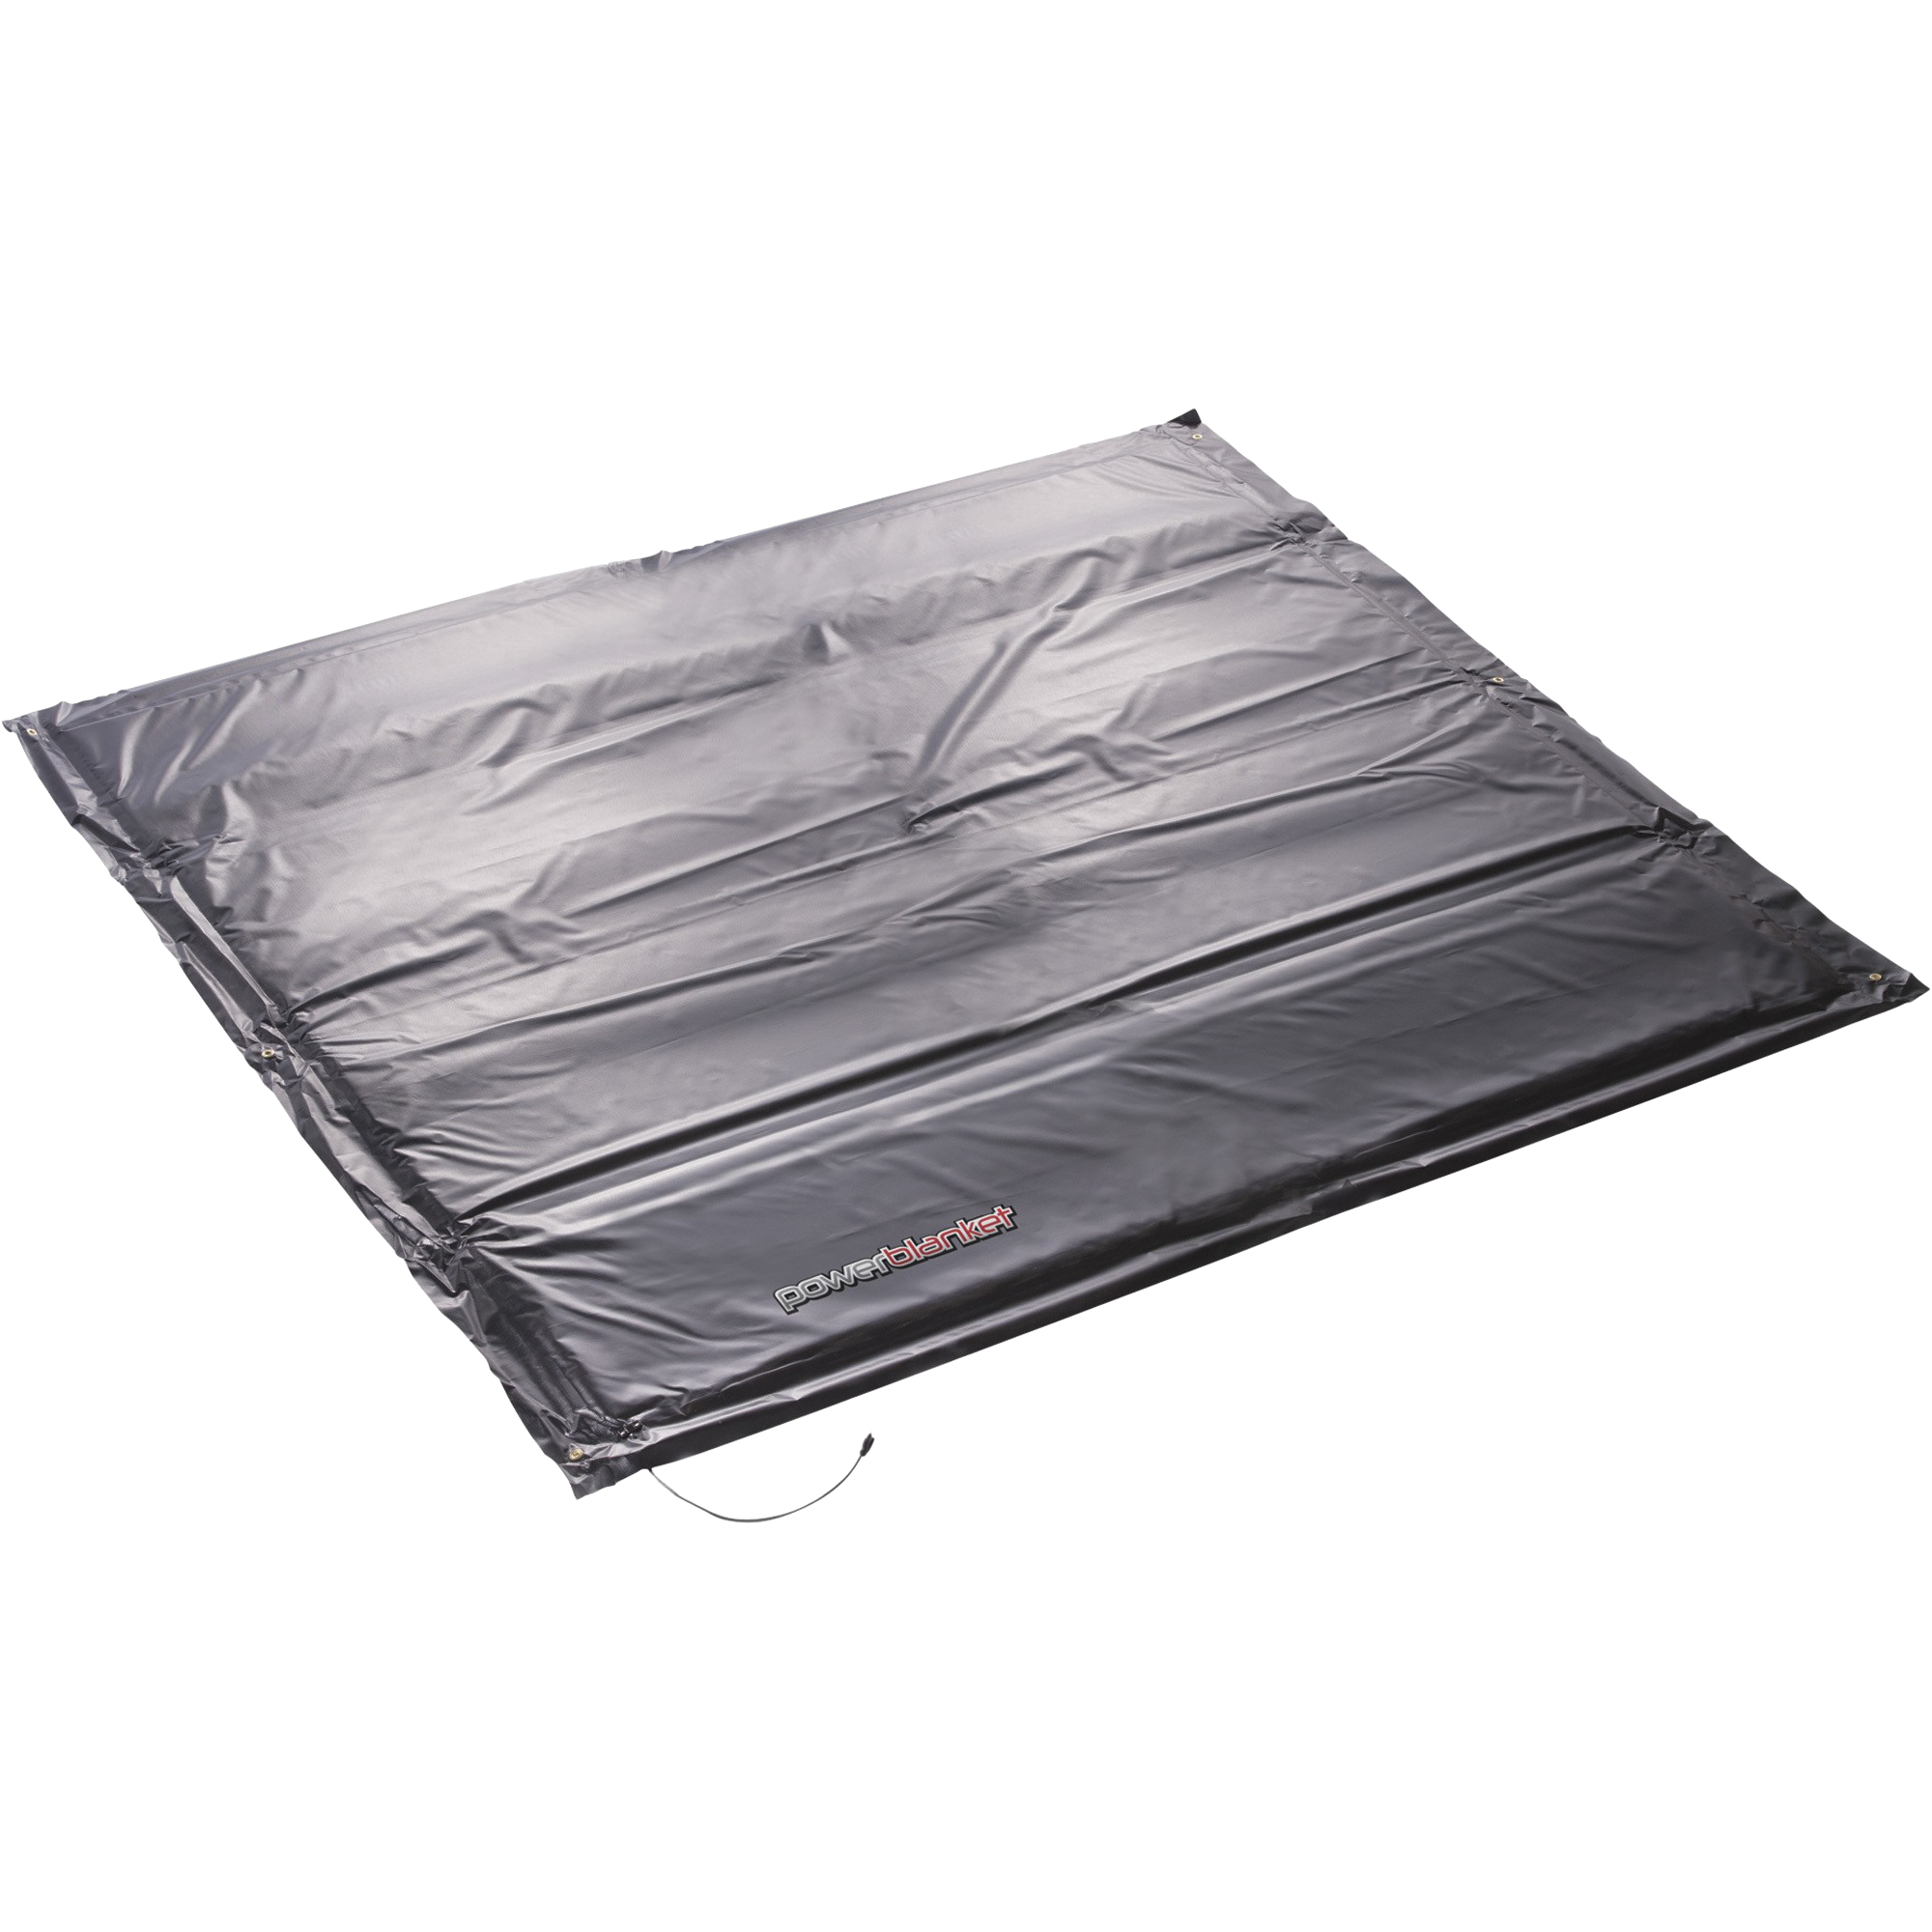 Powerblanket MD1010 10' x 10' Concrete Curing Blanket New